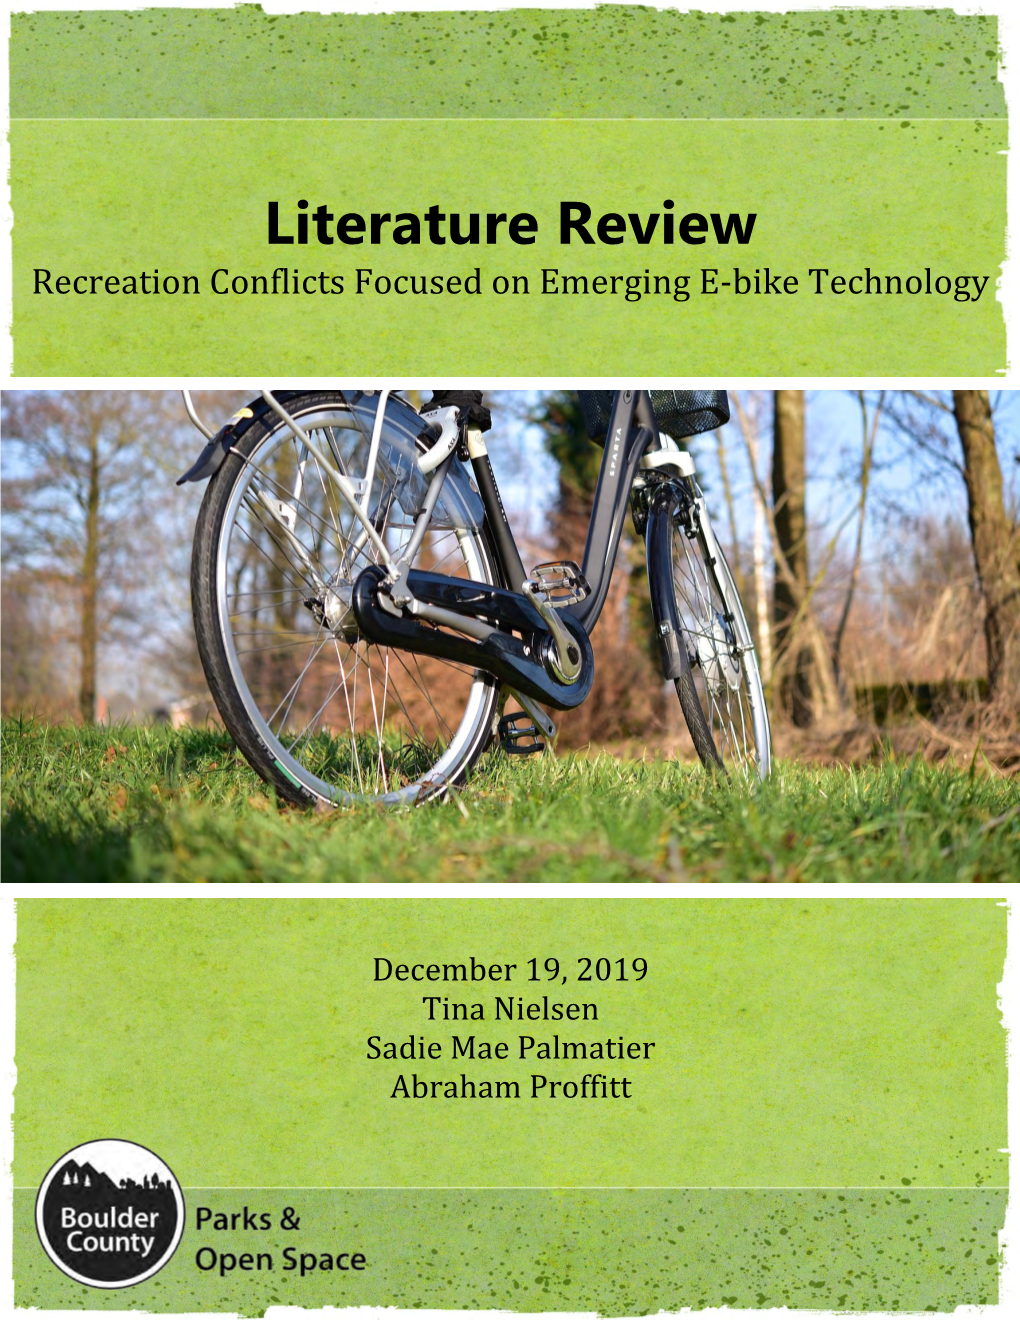 Literature Review of Bicycle and E-Bike Research, Policies & Management